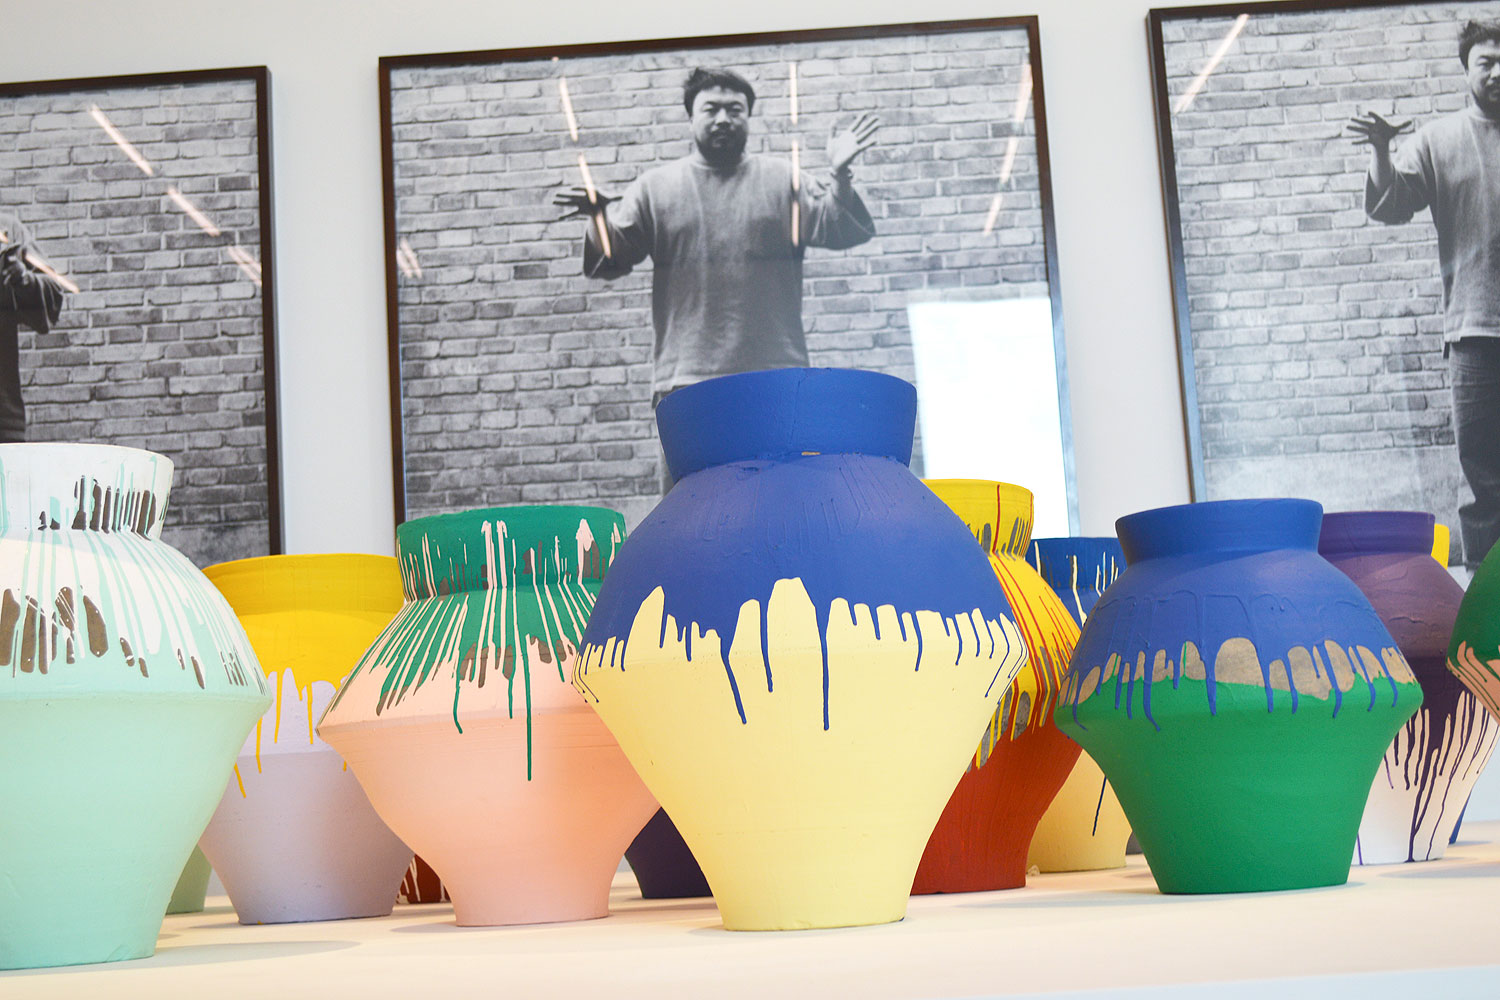 Chinese artist Ai Weiwei's "Colored Vases" are shown at the Perez Art Museum Miami, Florida in this Dec. 3, 2013 photo (Zachary Fagenson—Reuters)